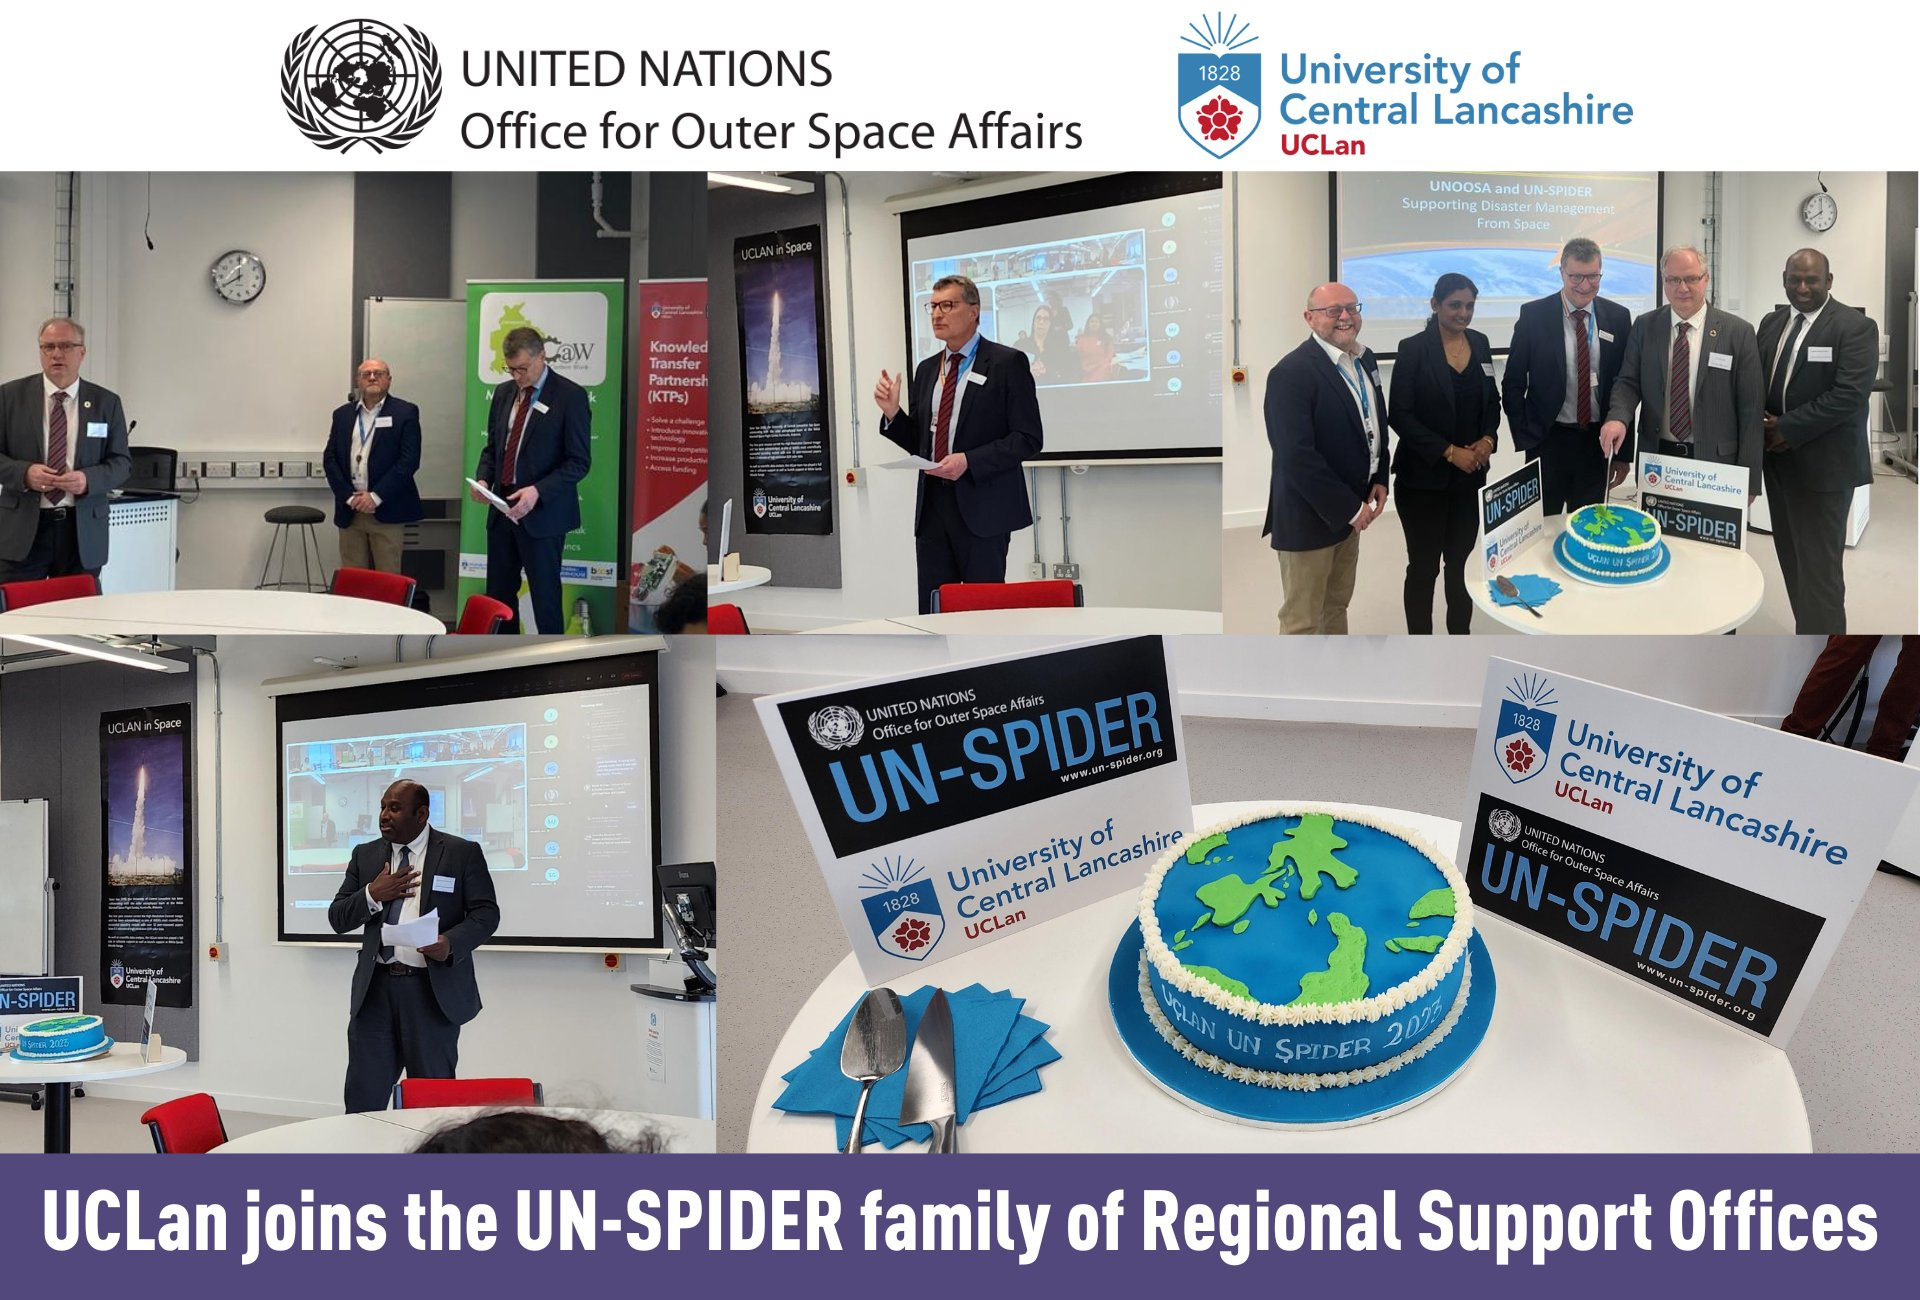 University of Central Lancashire becomes 27th UN-SPIDER Regional Support Office